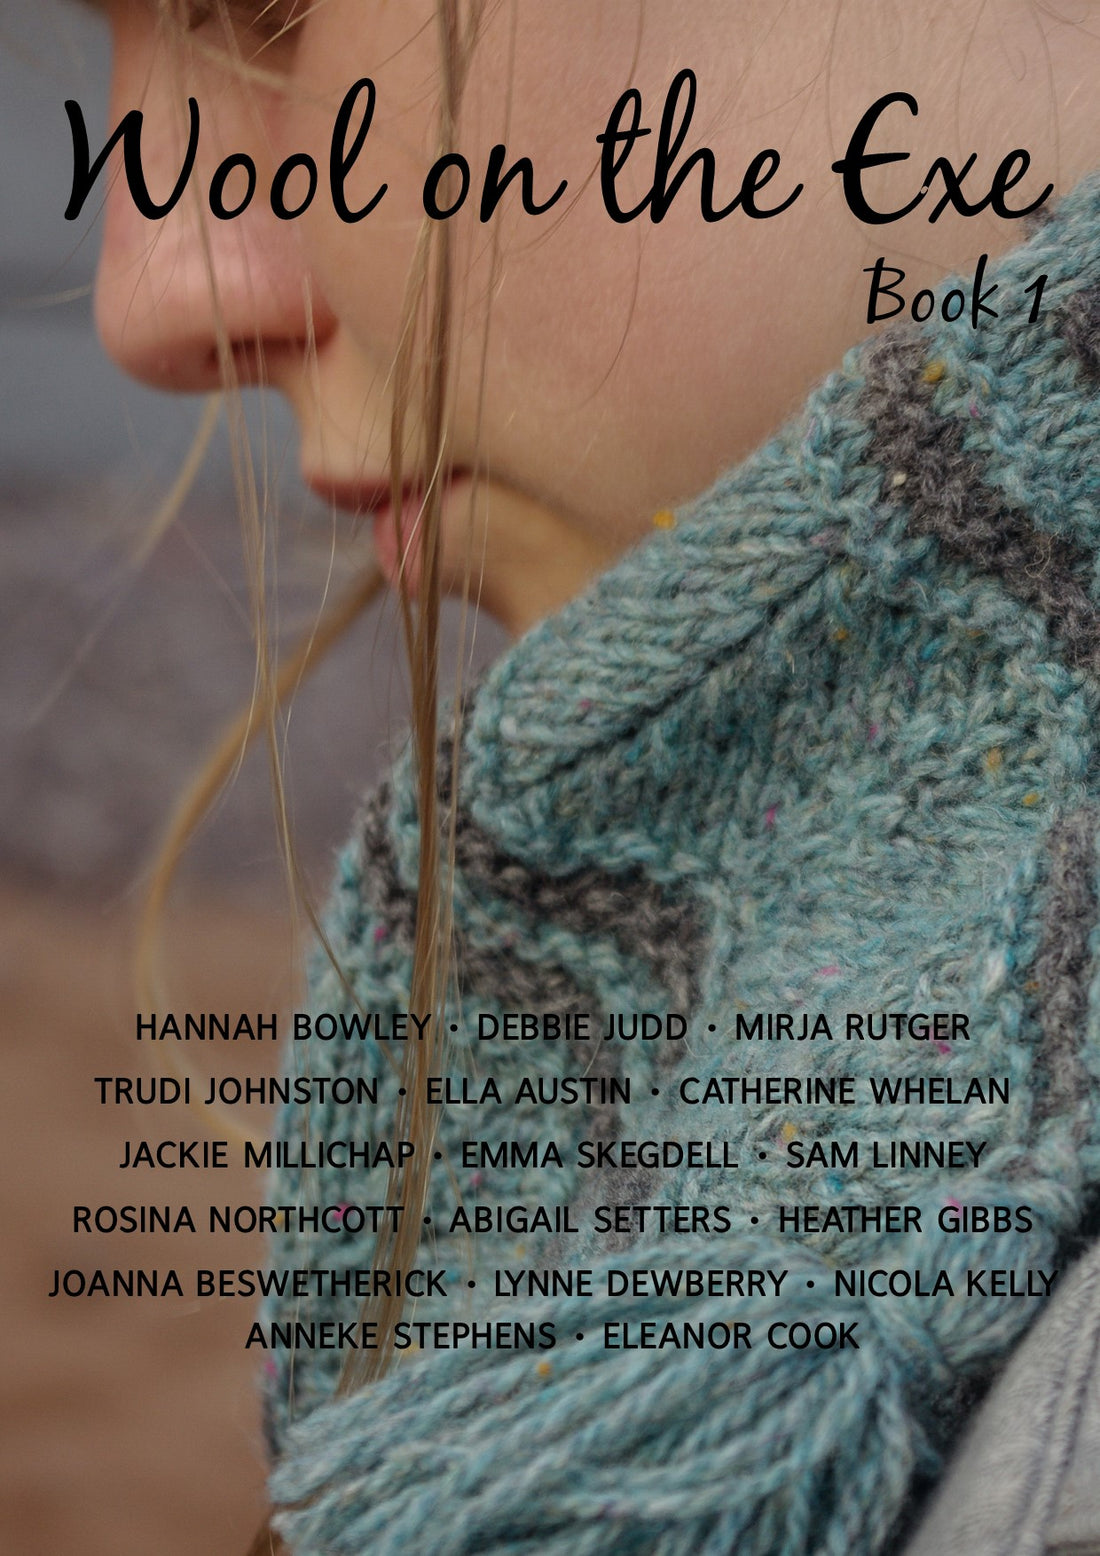 Introducing Wool on the Exe Book 1